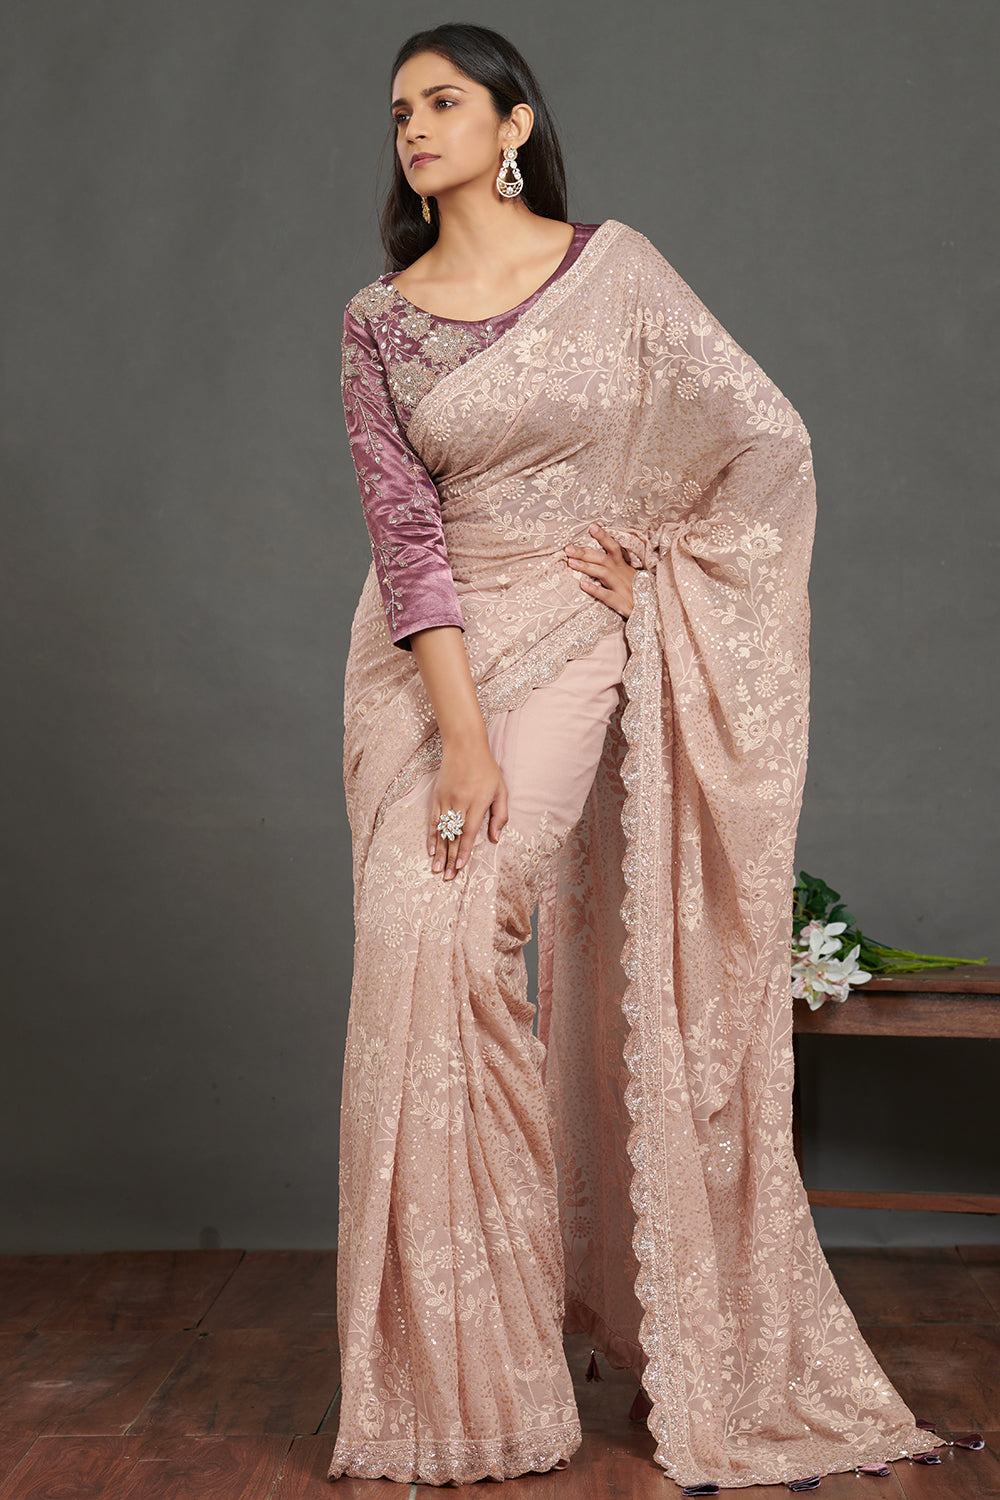 Buy stunning dusty pink chikankari saree online in USA with purple saree blouse. Make a fashion statement on festive occasions and weddings with designer sarees, embroidered saris, handwoven saris, party wear sarees from Pure Elegance Indian fashion store in USA.-pallu